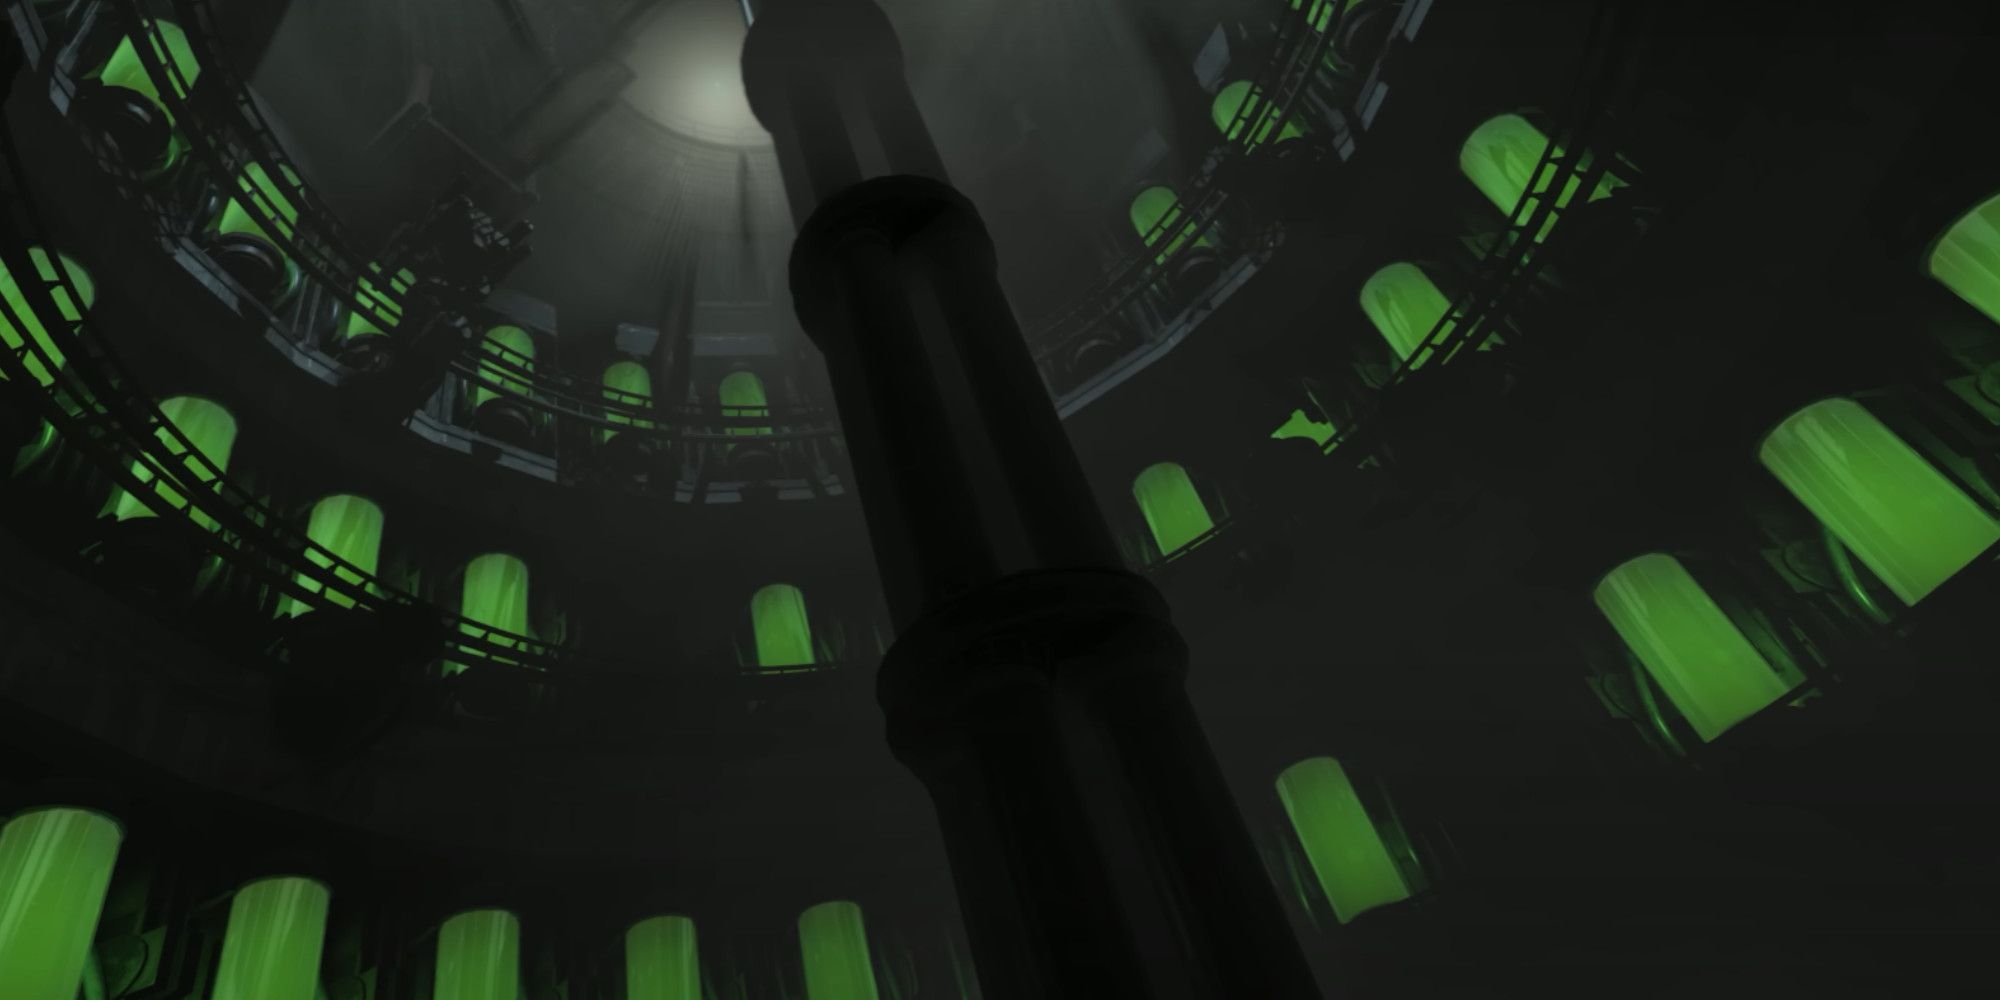 New Fallout: London Trailer Shows Off Spooky Subterranean Science Cylinders